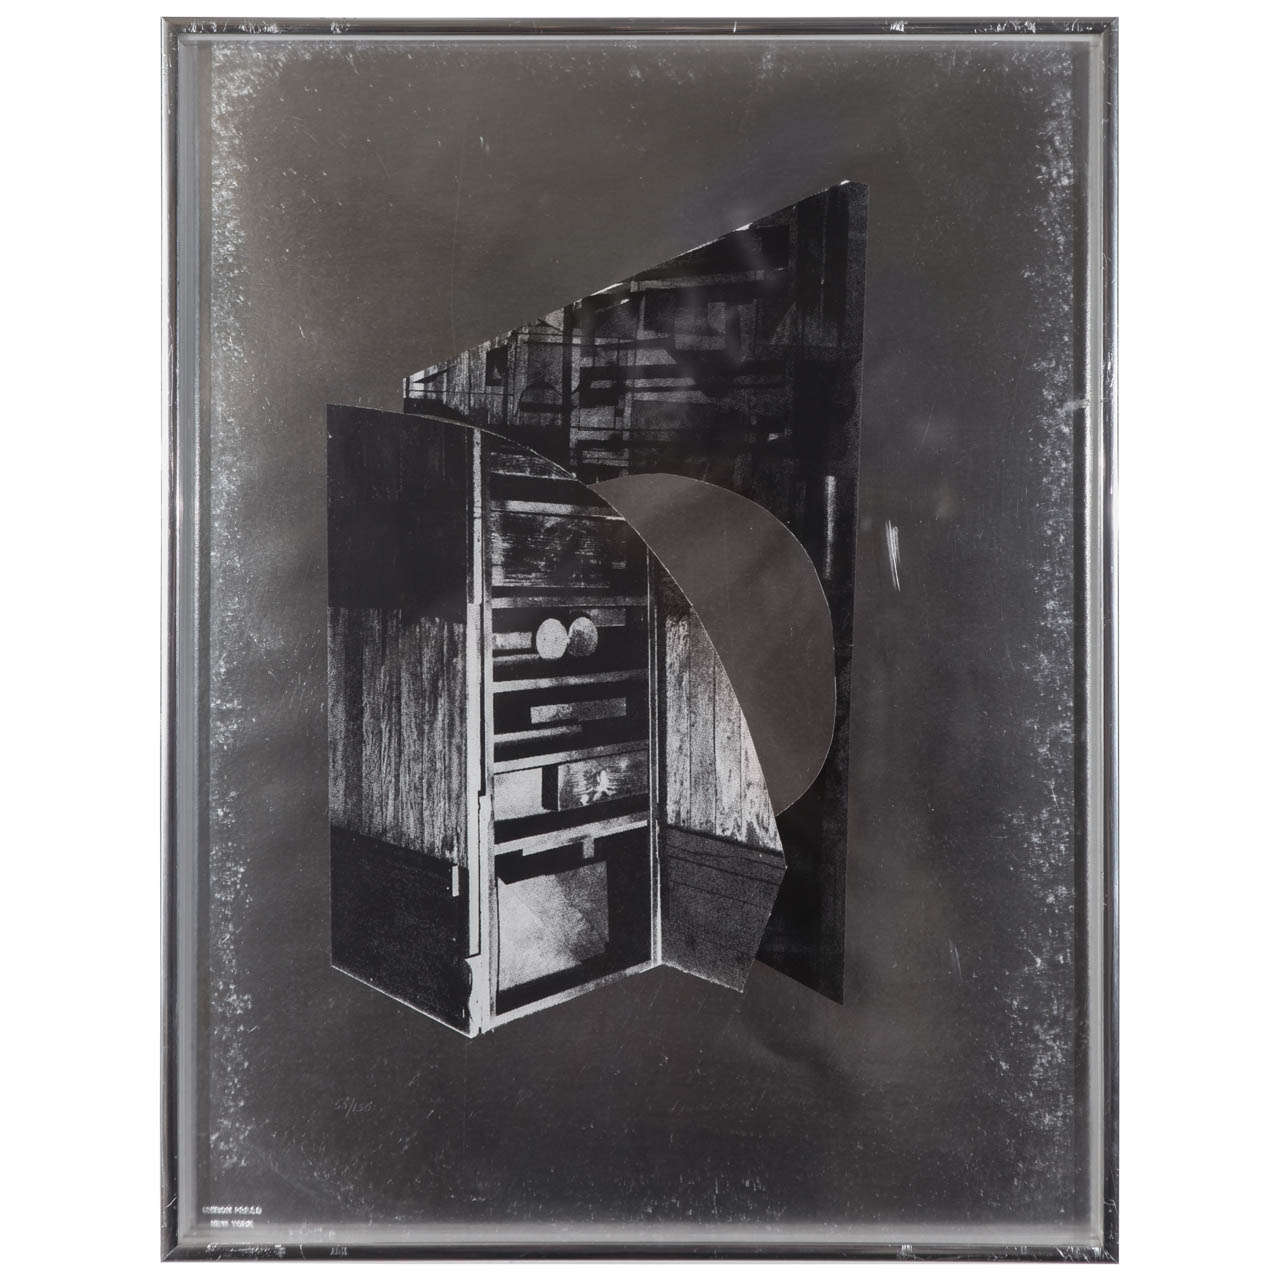 Louise Nevelson "Facade" Series Serigraphs